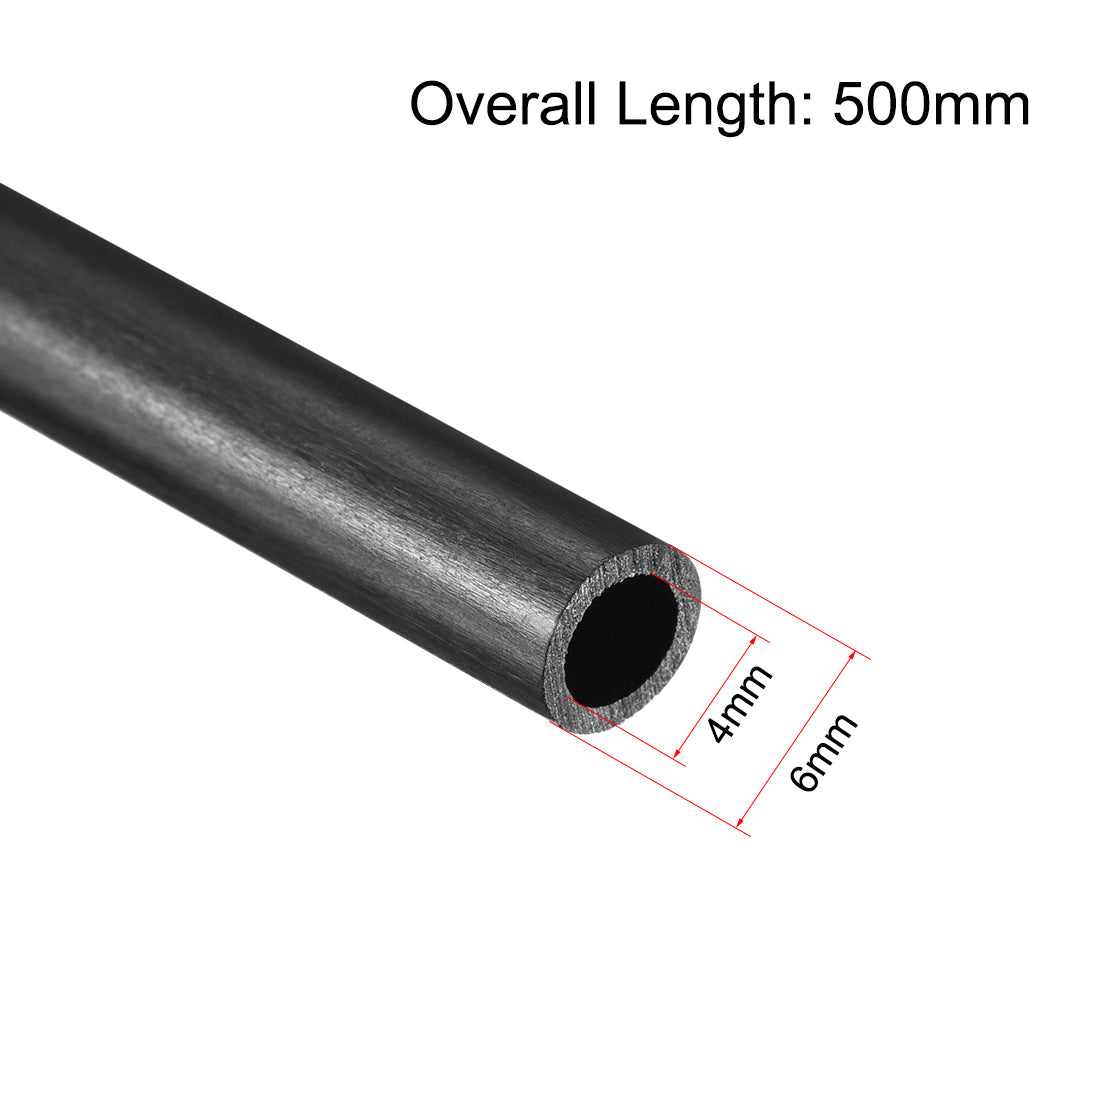 uxcell Uxcell Carbon Fiber Round Tube 6mm x 4mm x 500mm Carbon Fiber Wing Pultrusion Tubing for RC Airplane Quadcopter 3 Pcs